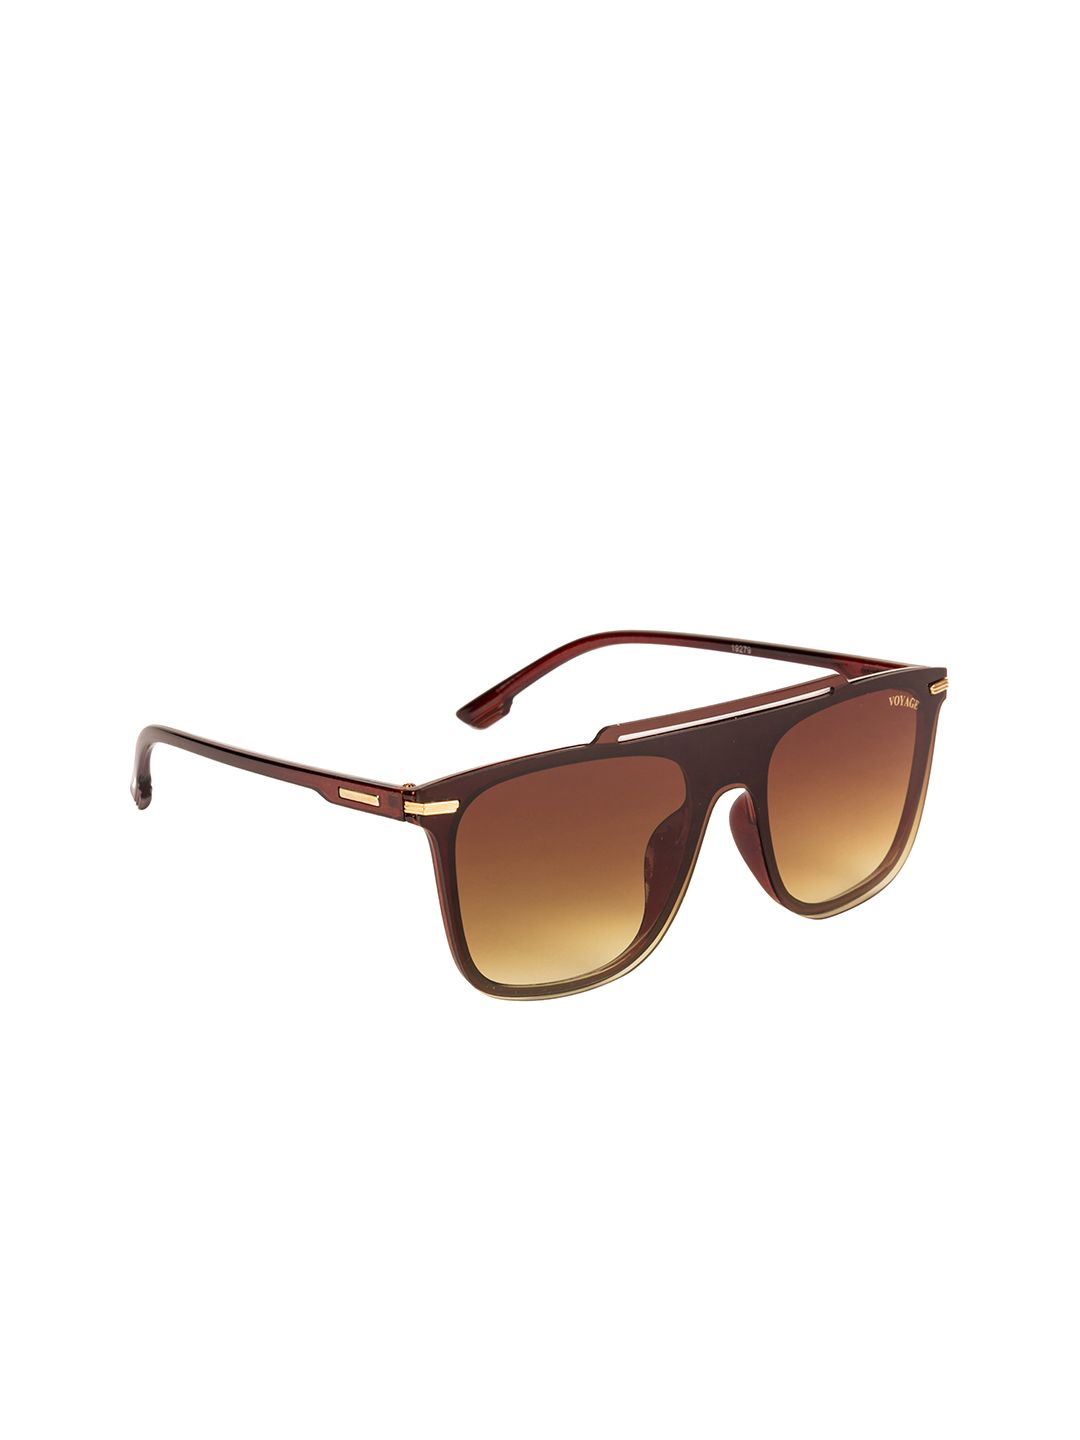 Voyage Brown Lens & Brown Wayfarer Sunglasses with UV Protected Lens Price in India